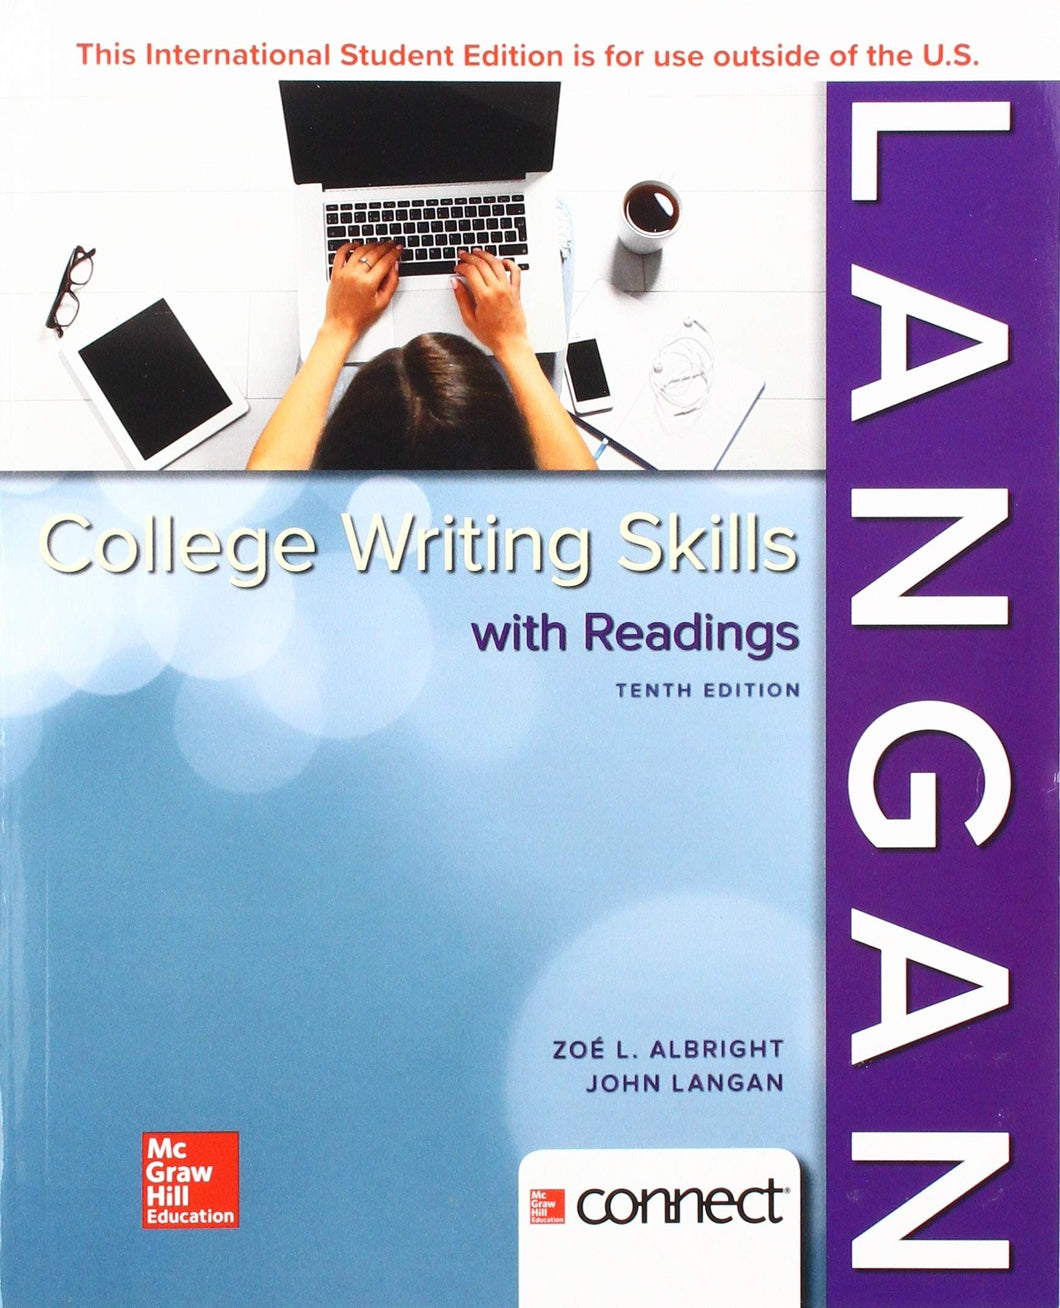 COLLEGE WRITING SKILLS WITH READINGS [Paperback] 10e by Langan - Smiling Bookstore :-)